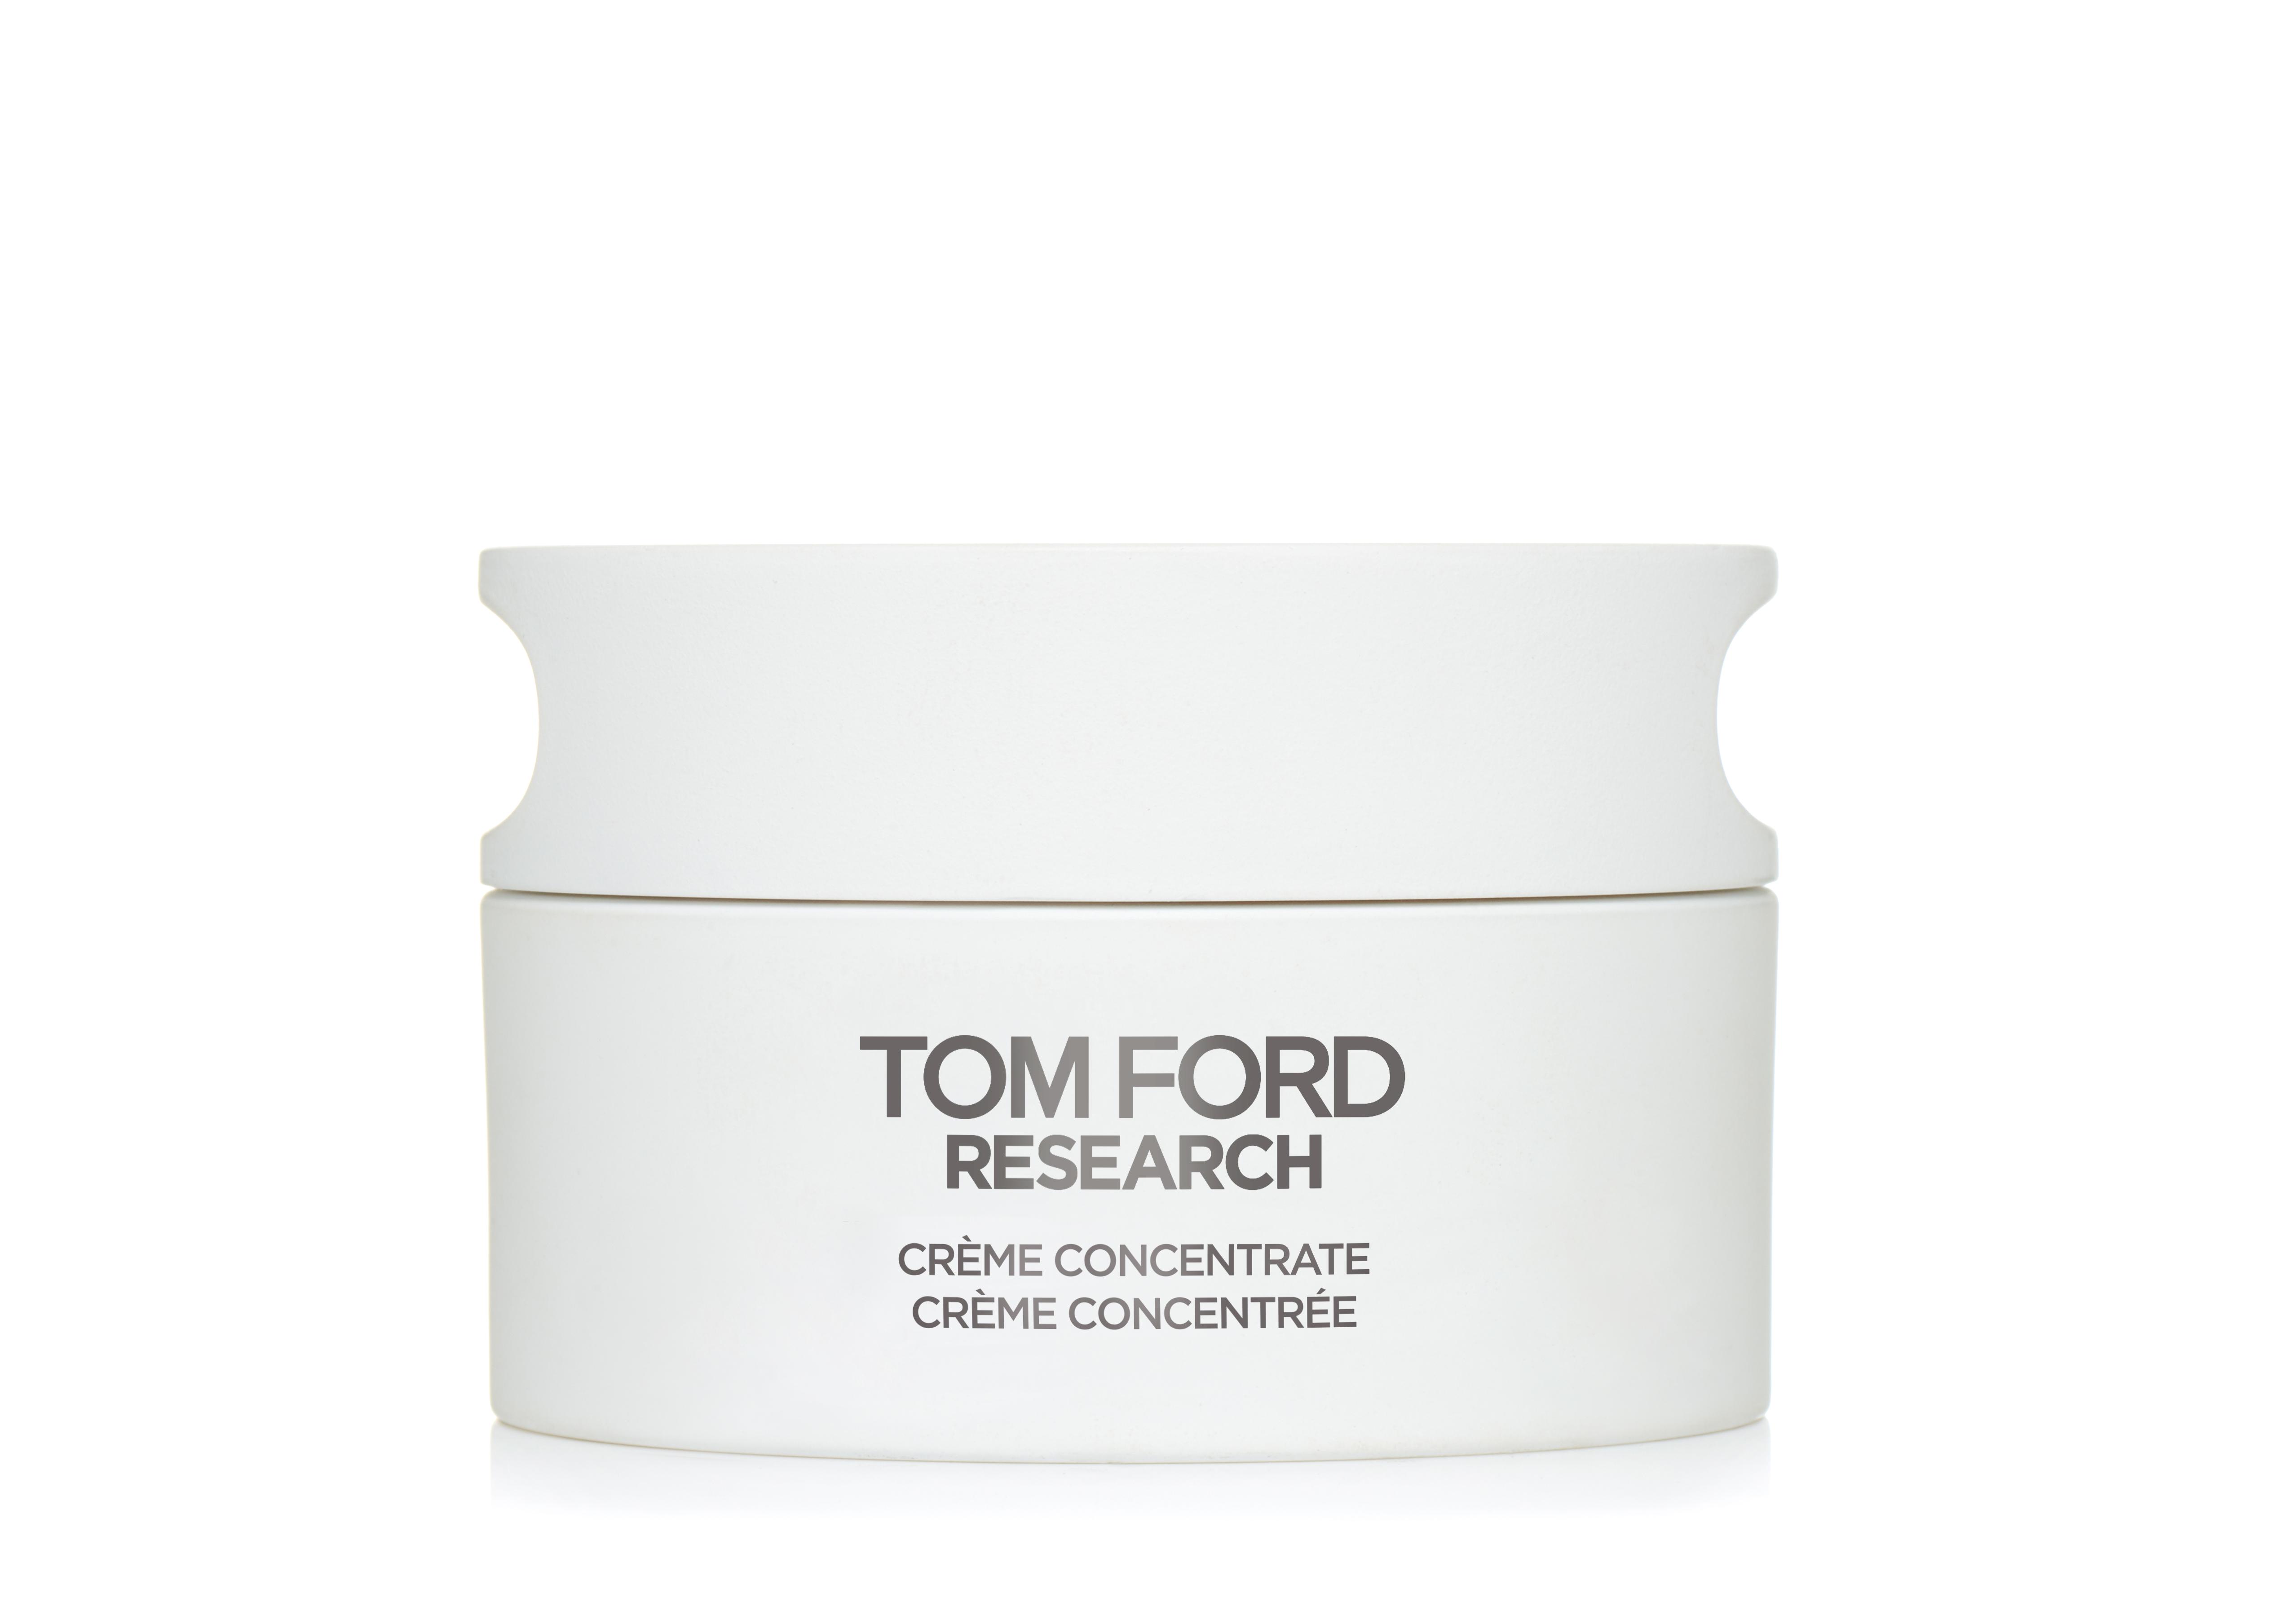 Tom Ford TOM FORD RESEARCH CREME CONCENTRATE 